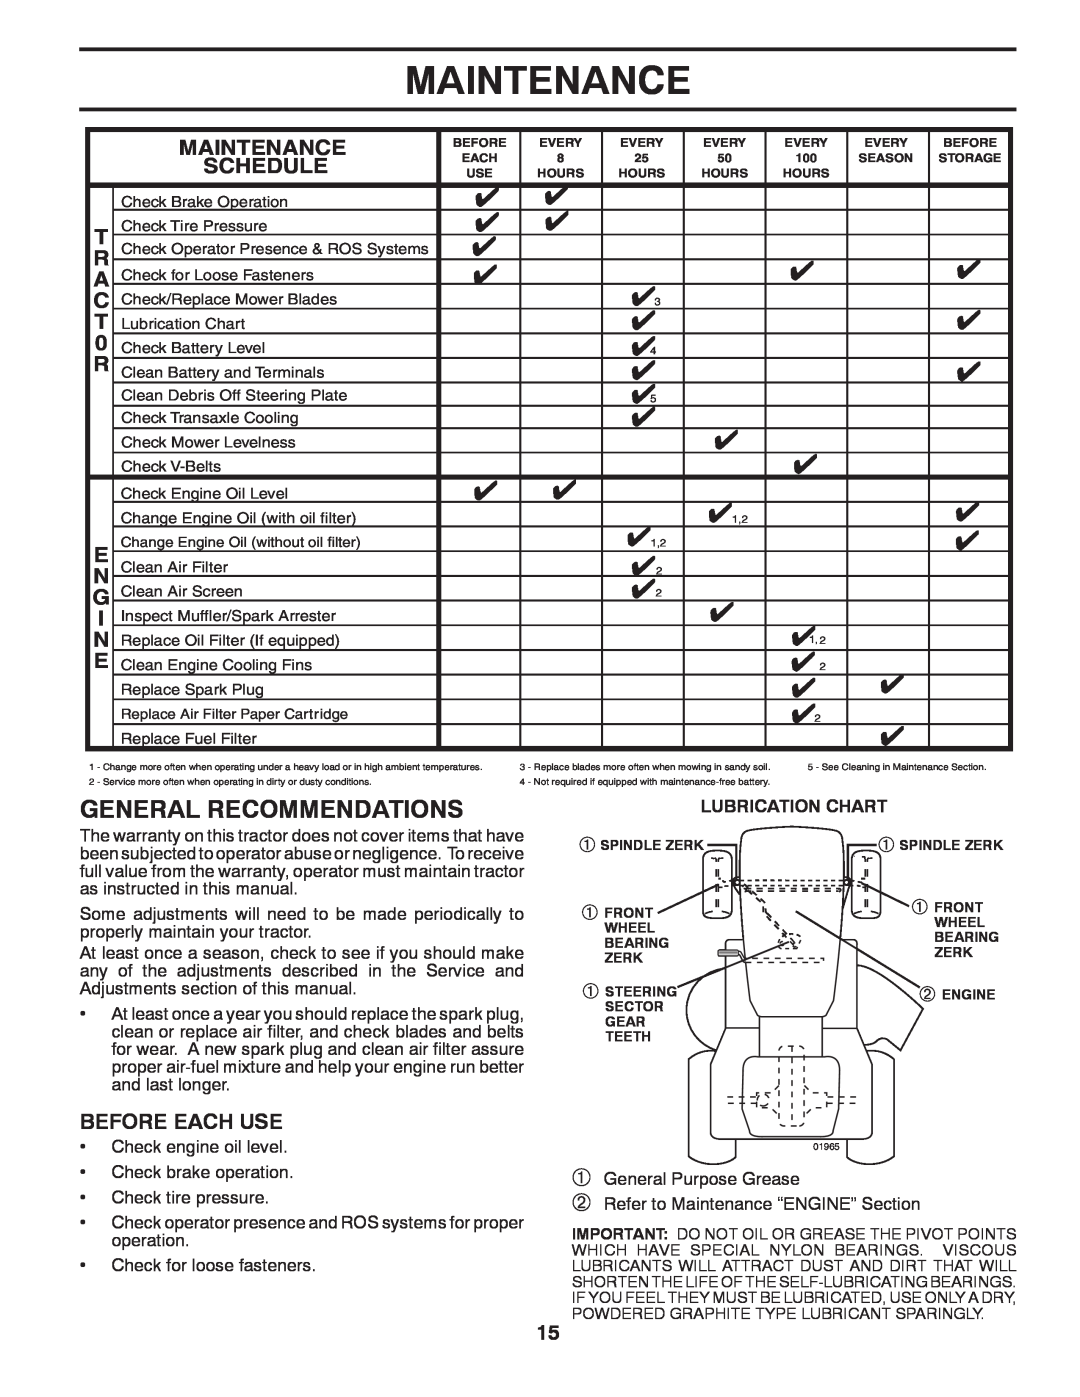 Husqvarna 917.2896 owner manual Maintenance, General Recommendations, Schedule, Before Each Use 